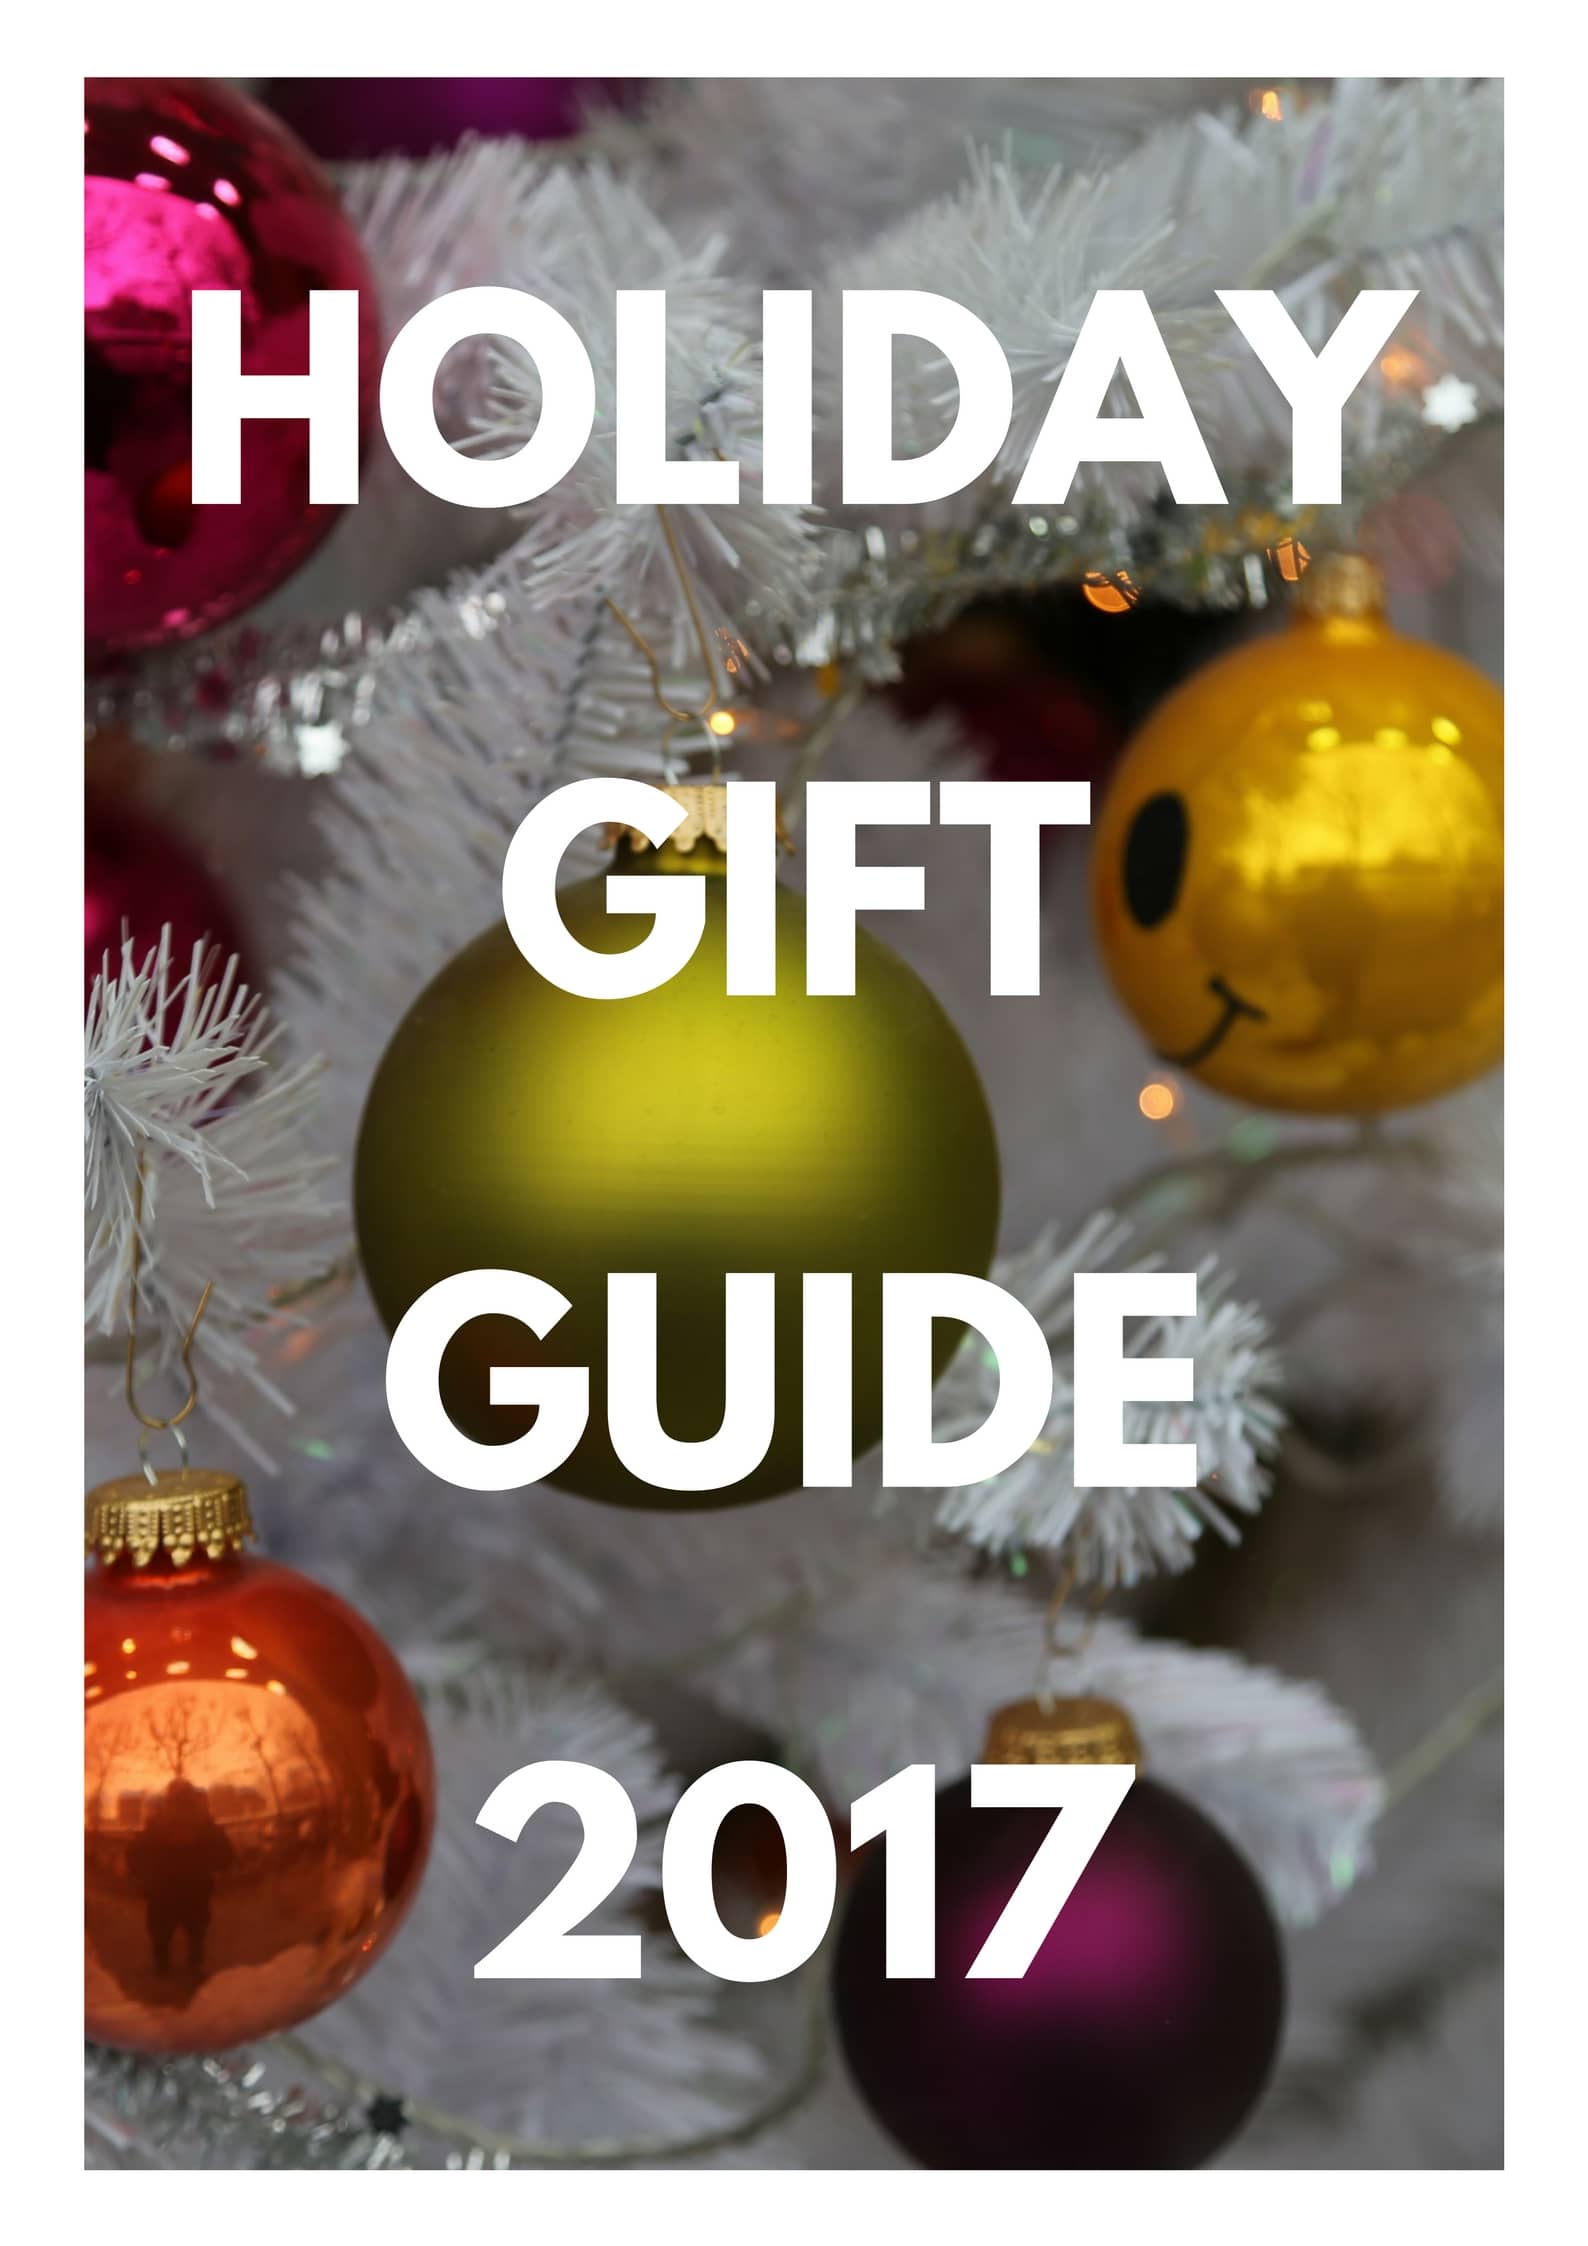 Best Holiday Gifts for 2017